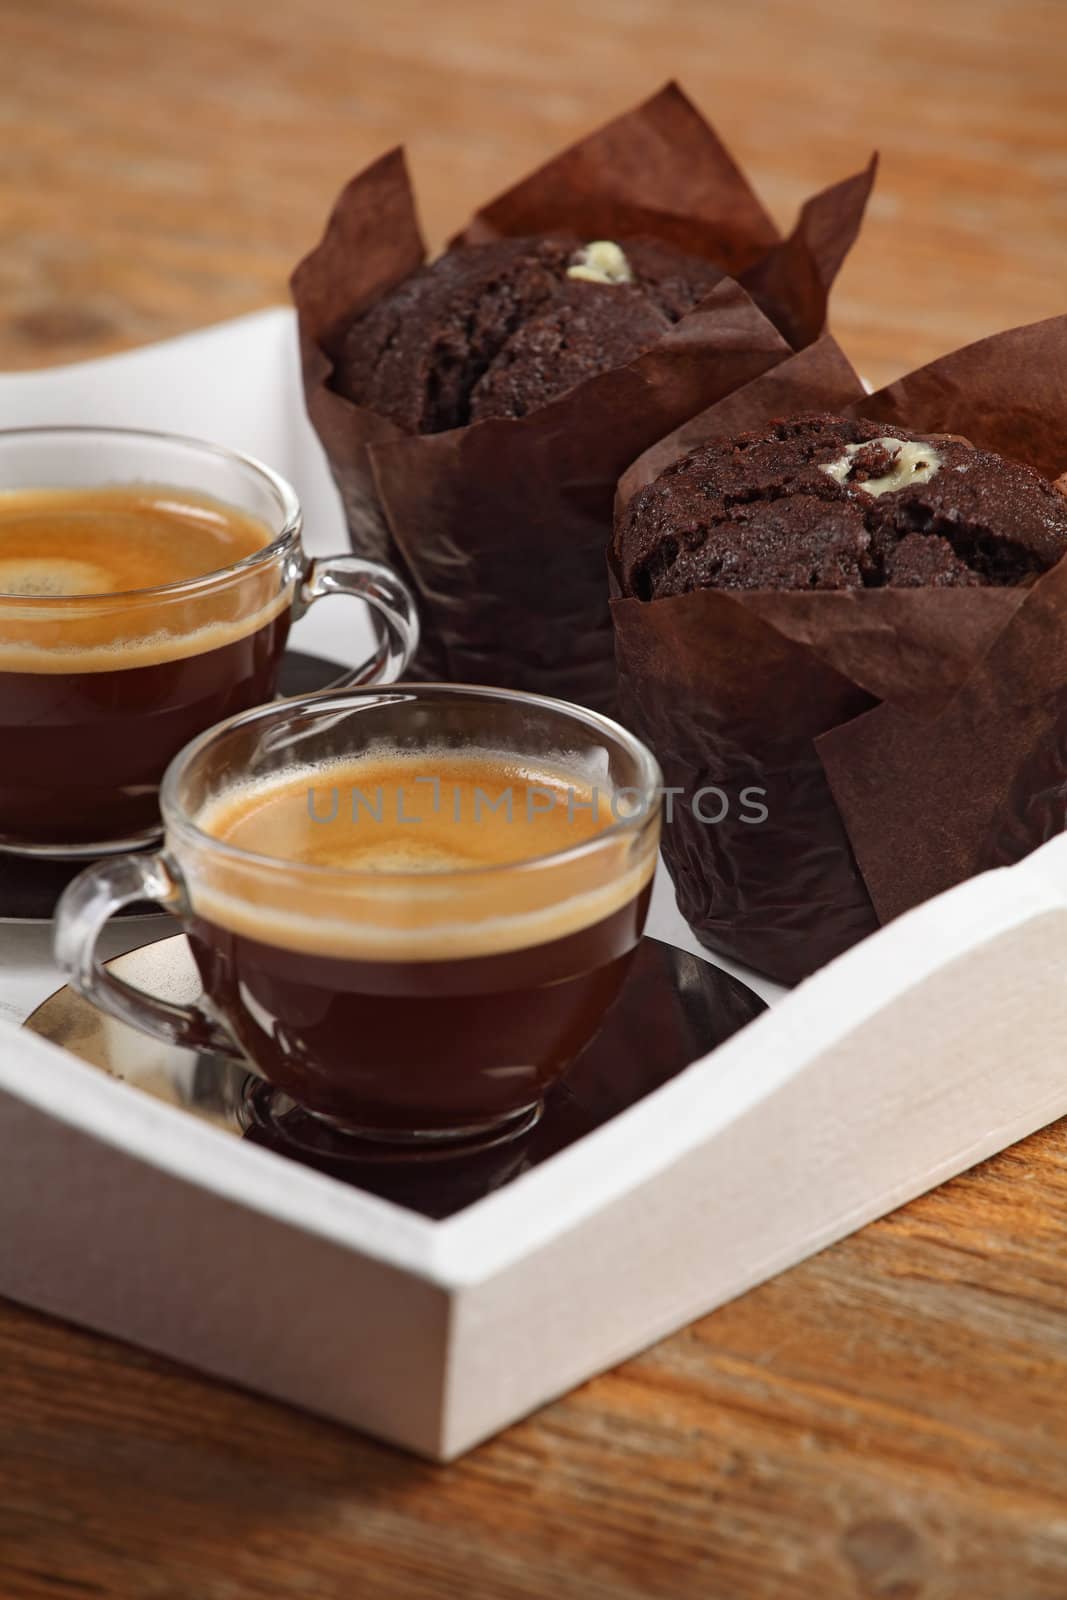 Photo of two moist chocolate muffins and two cups of espresso or coffee resting on a white serving tray. Shallow depth of field focusing across middle of photo.